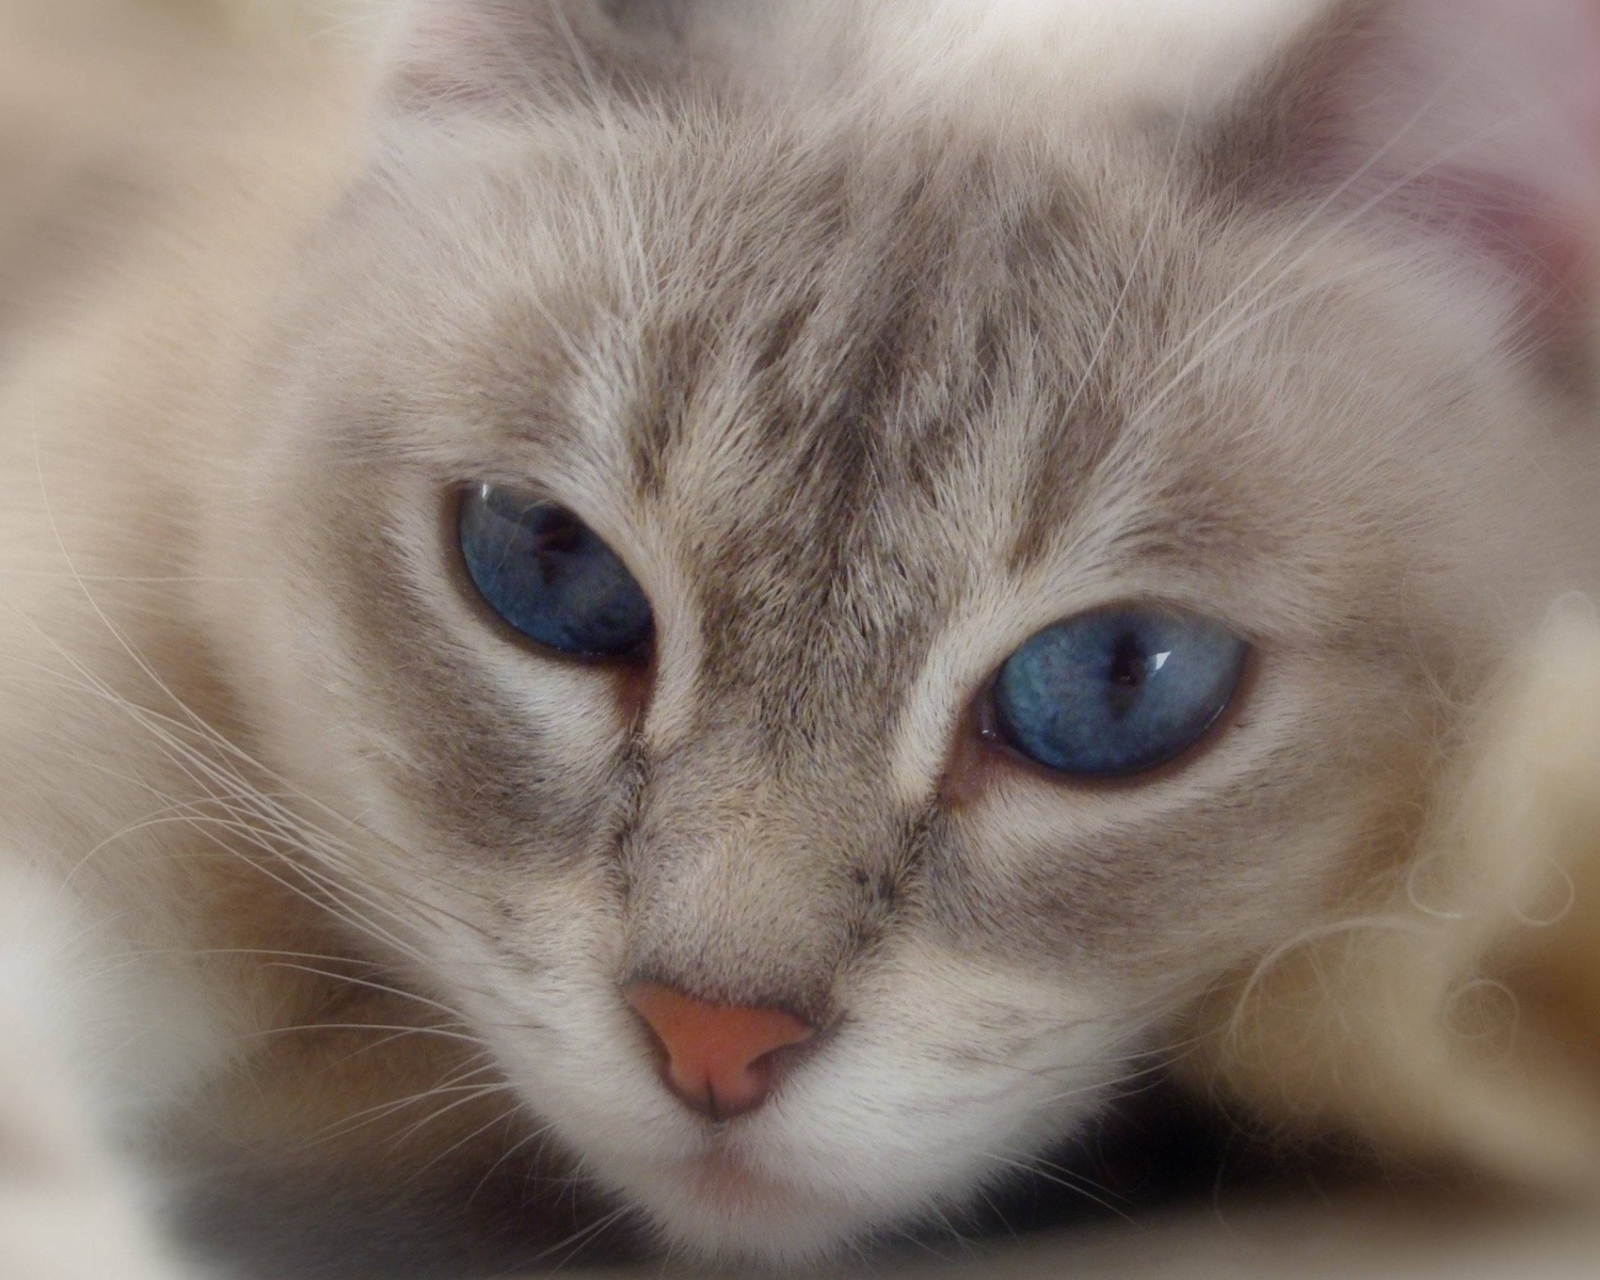 Cat With Blue Eyes wallpaper 1600x1280